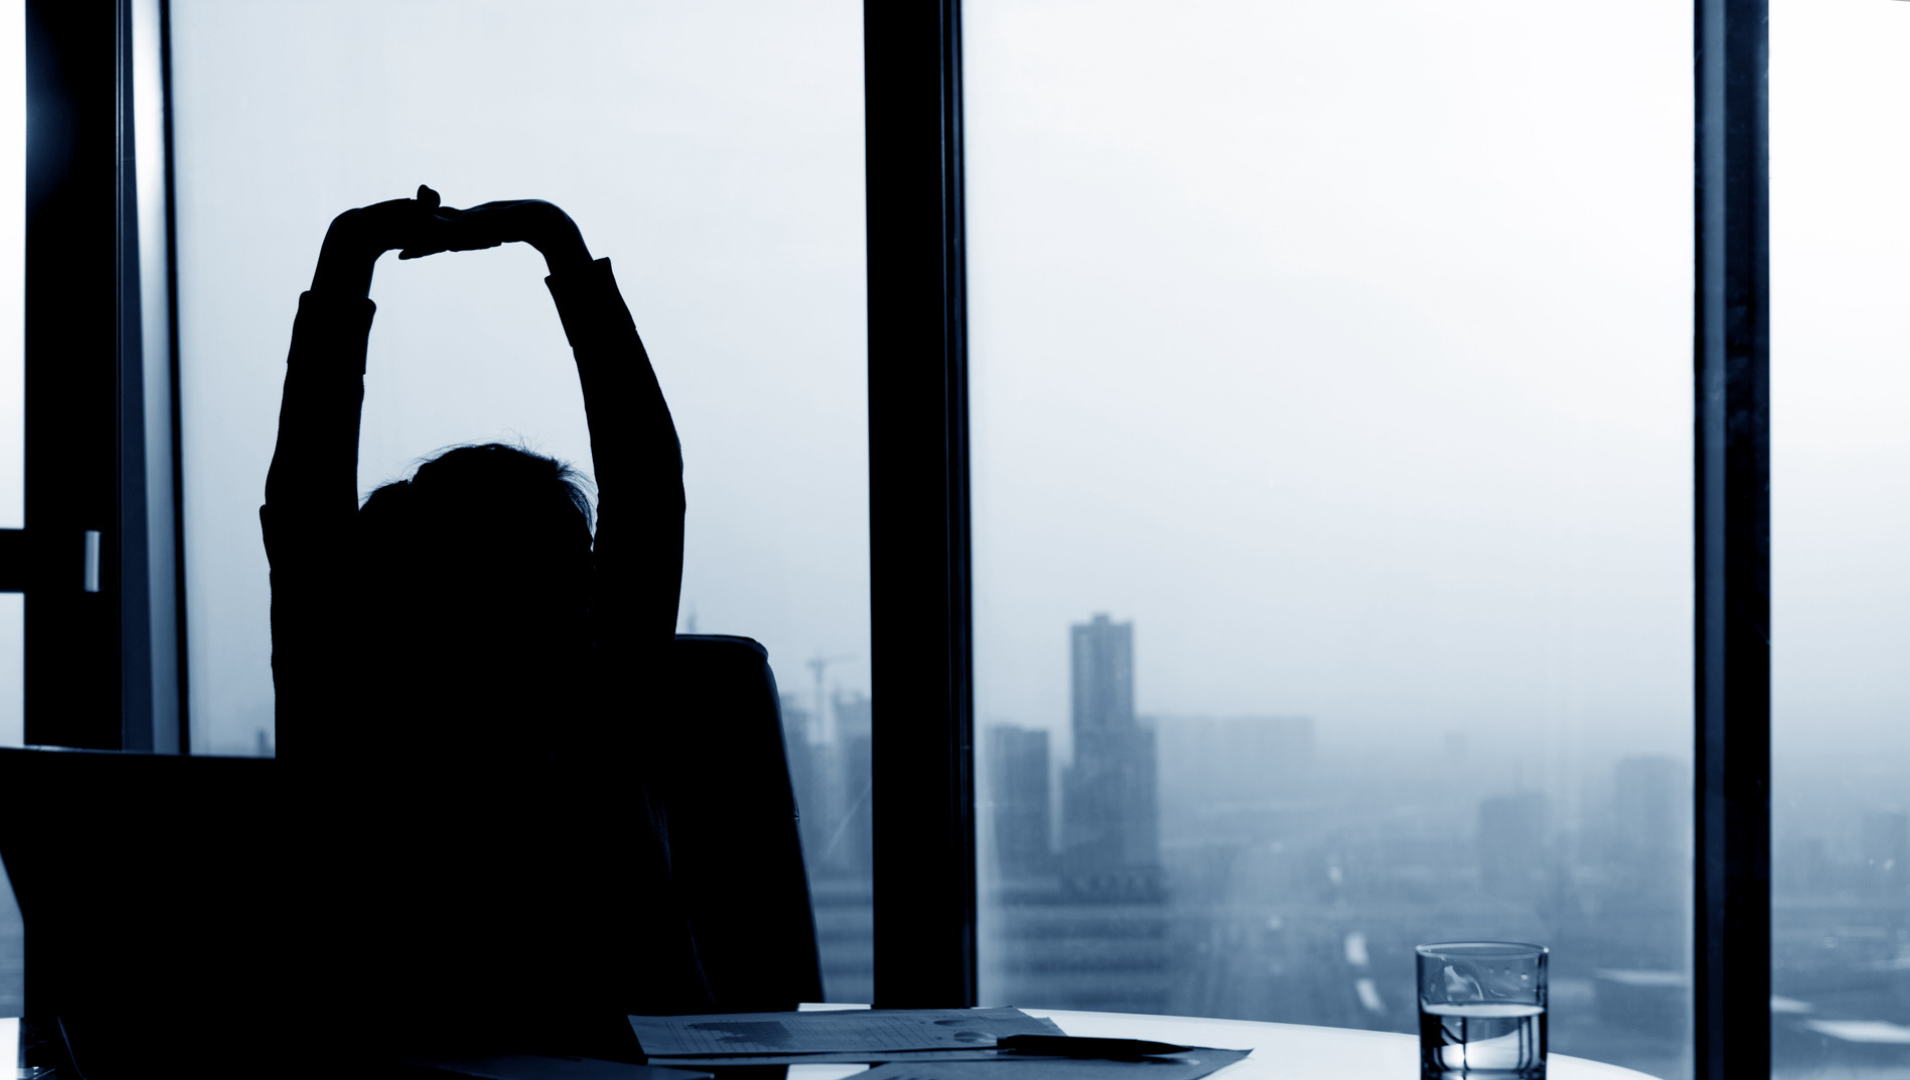 Silhouette of a woman stretch her arms above her head at her desk in front of a window